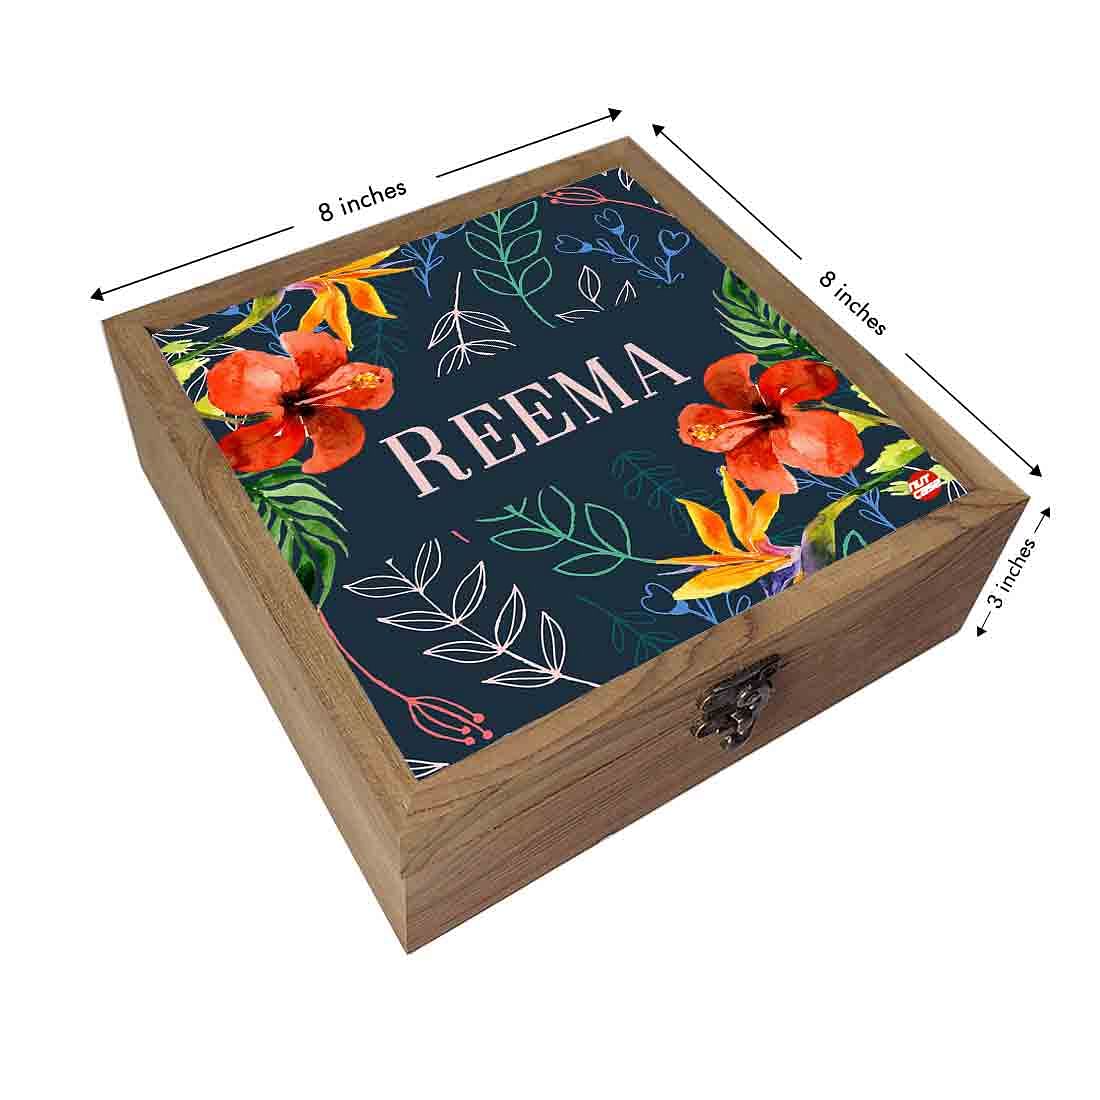 Customized Jewellery Box With Name - Hibiscus Leaf Nutcase